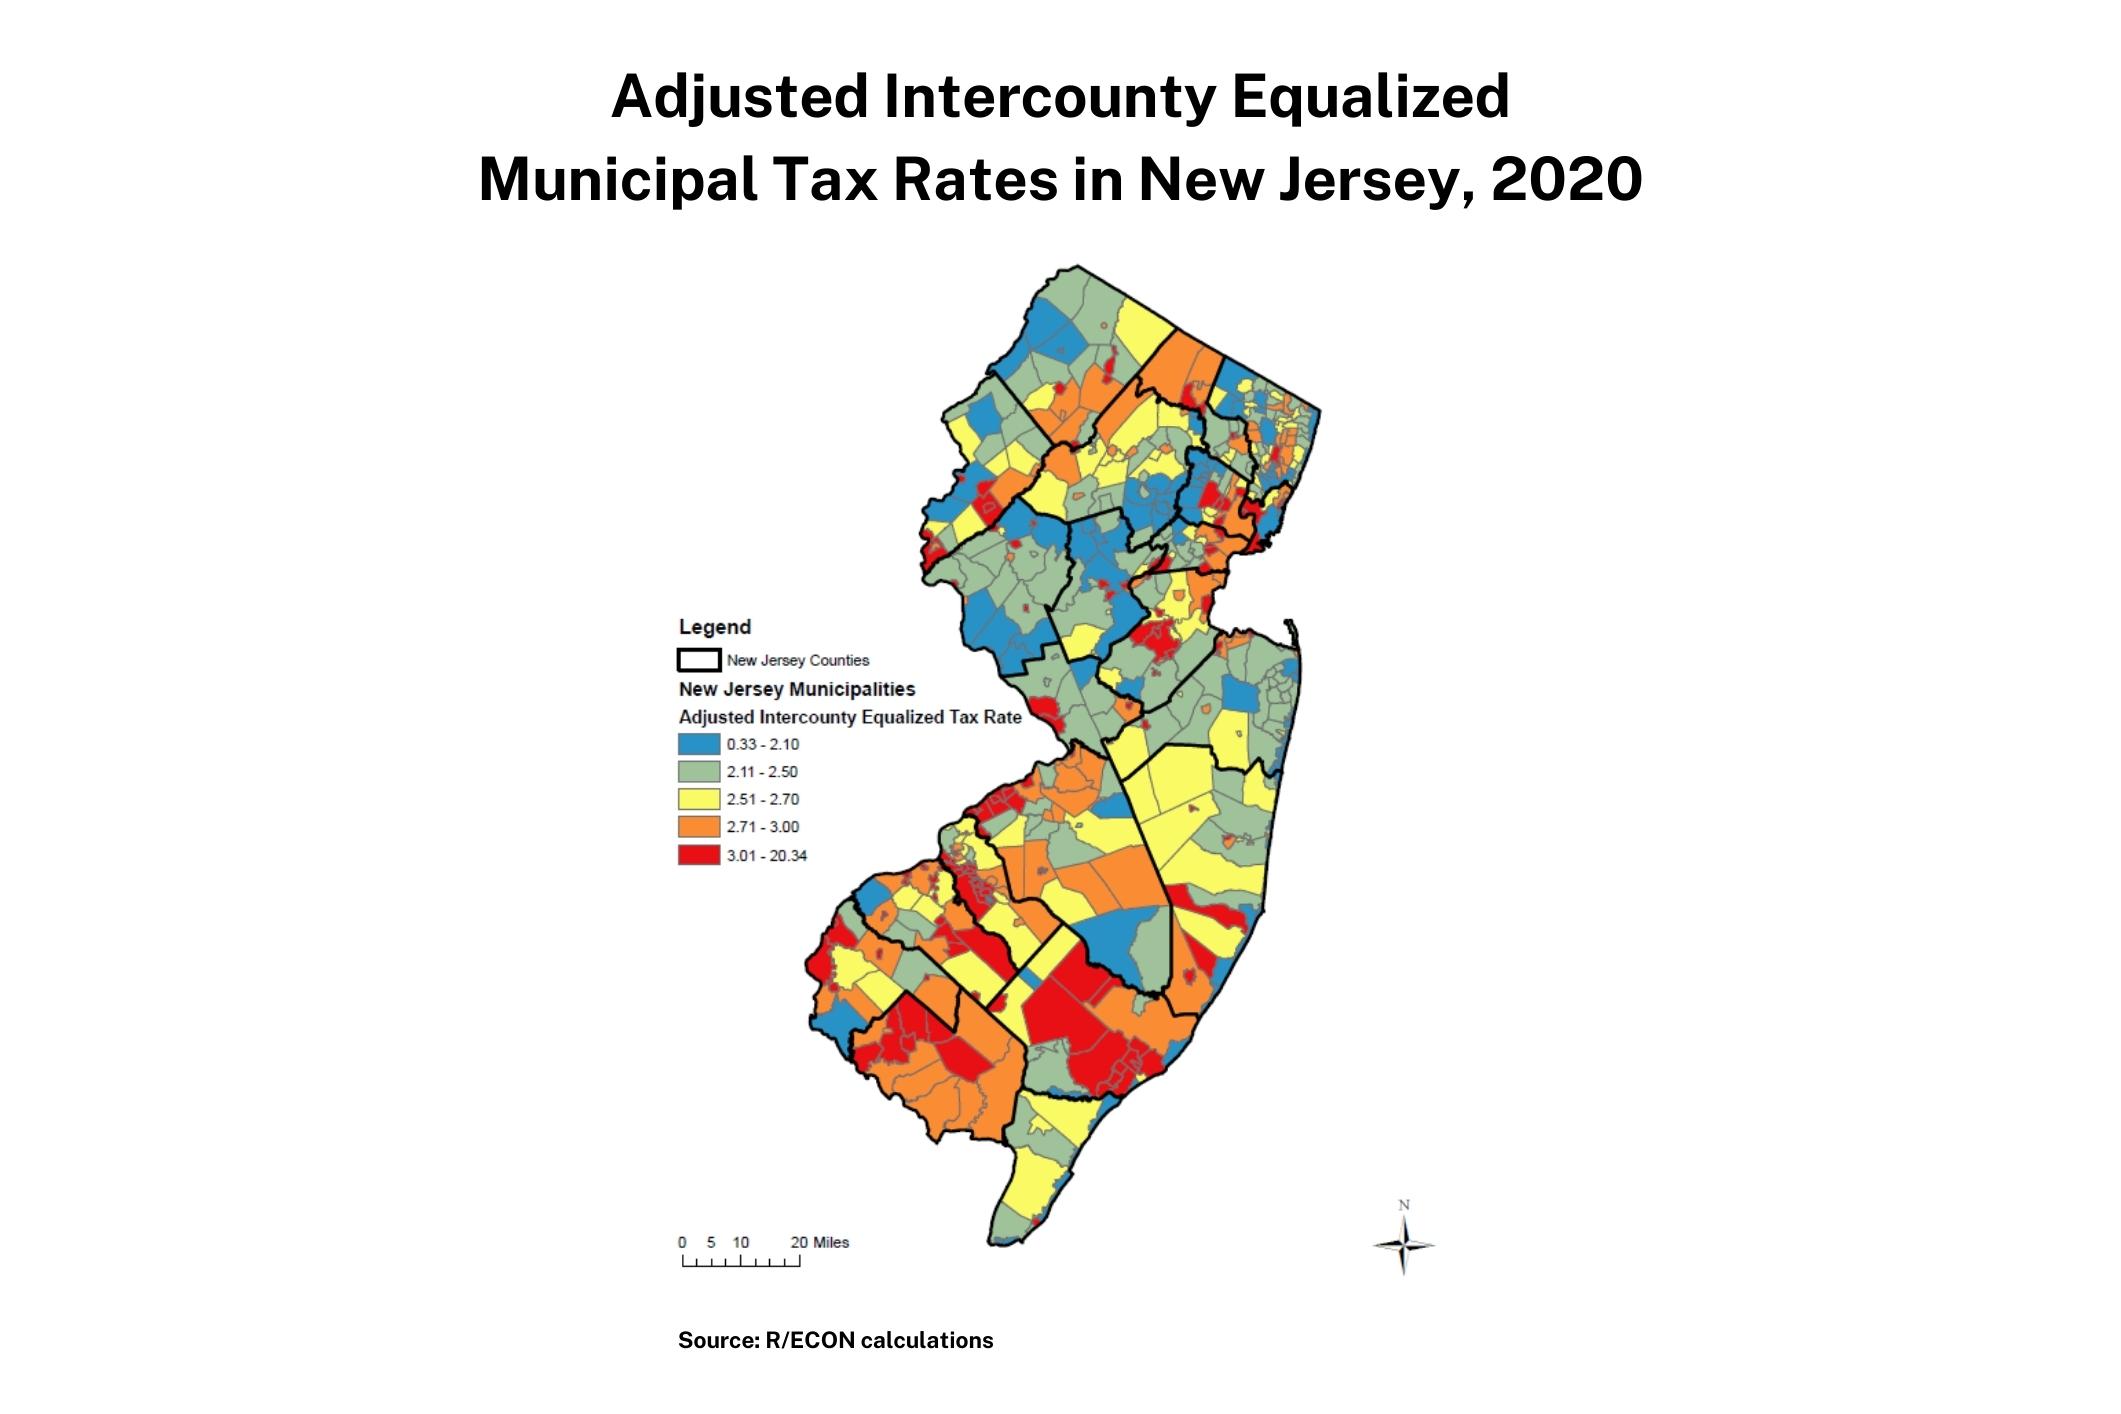 Report Release What Influences Differences in New Jersey’s Municipal